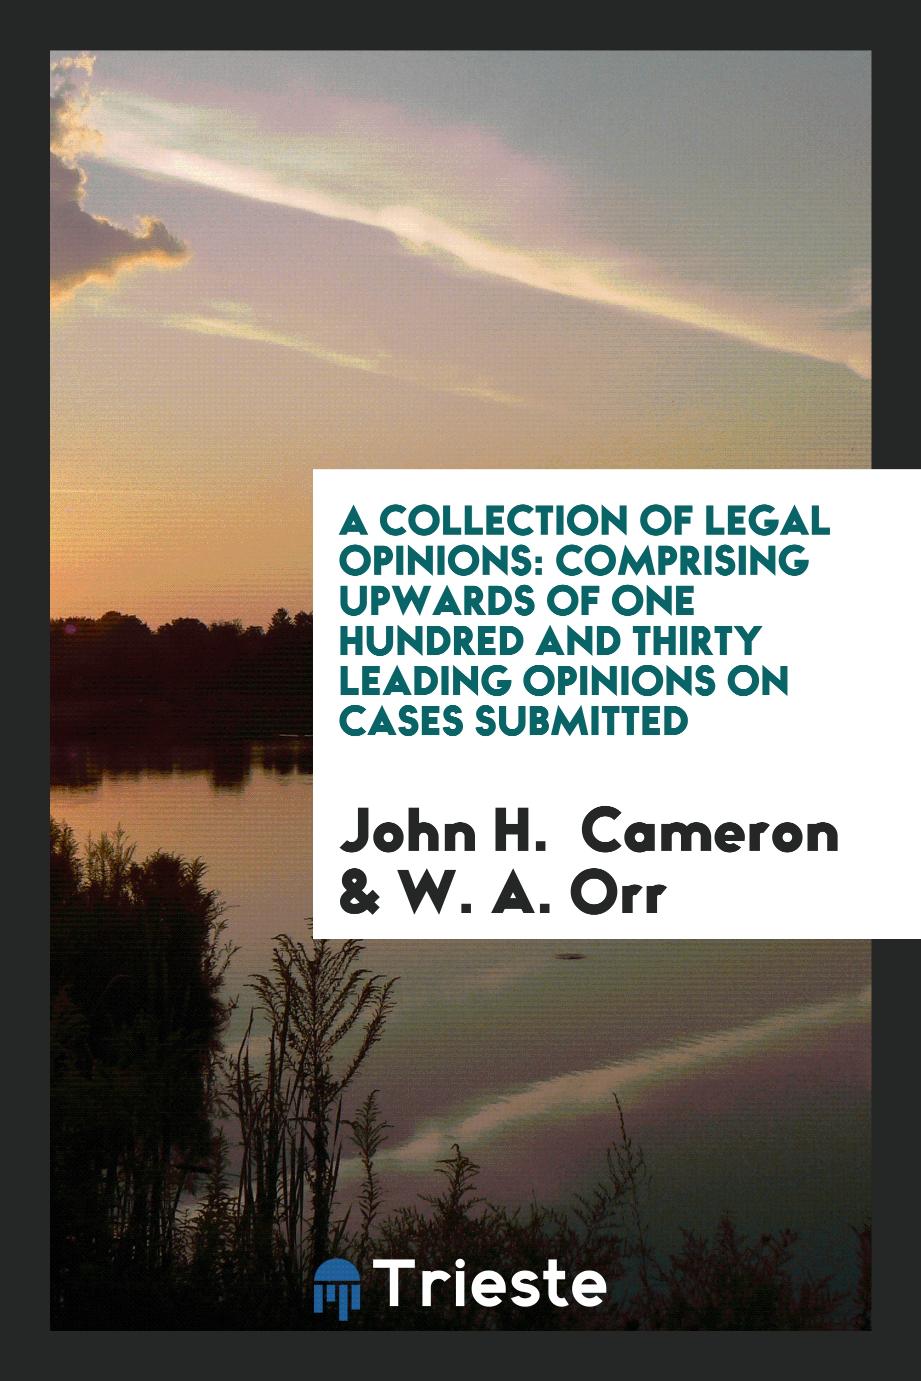 A Collection Of Legal Opinions: Comprising Upwards Of One Hundred And Thirty Leading Opinions On Cases Submitted